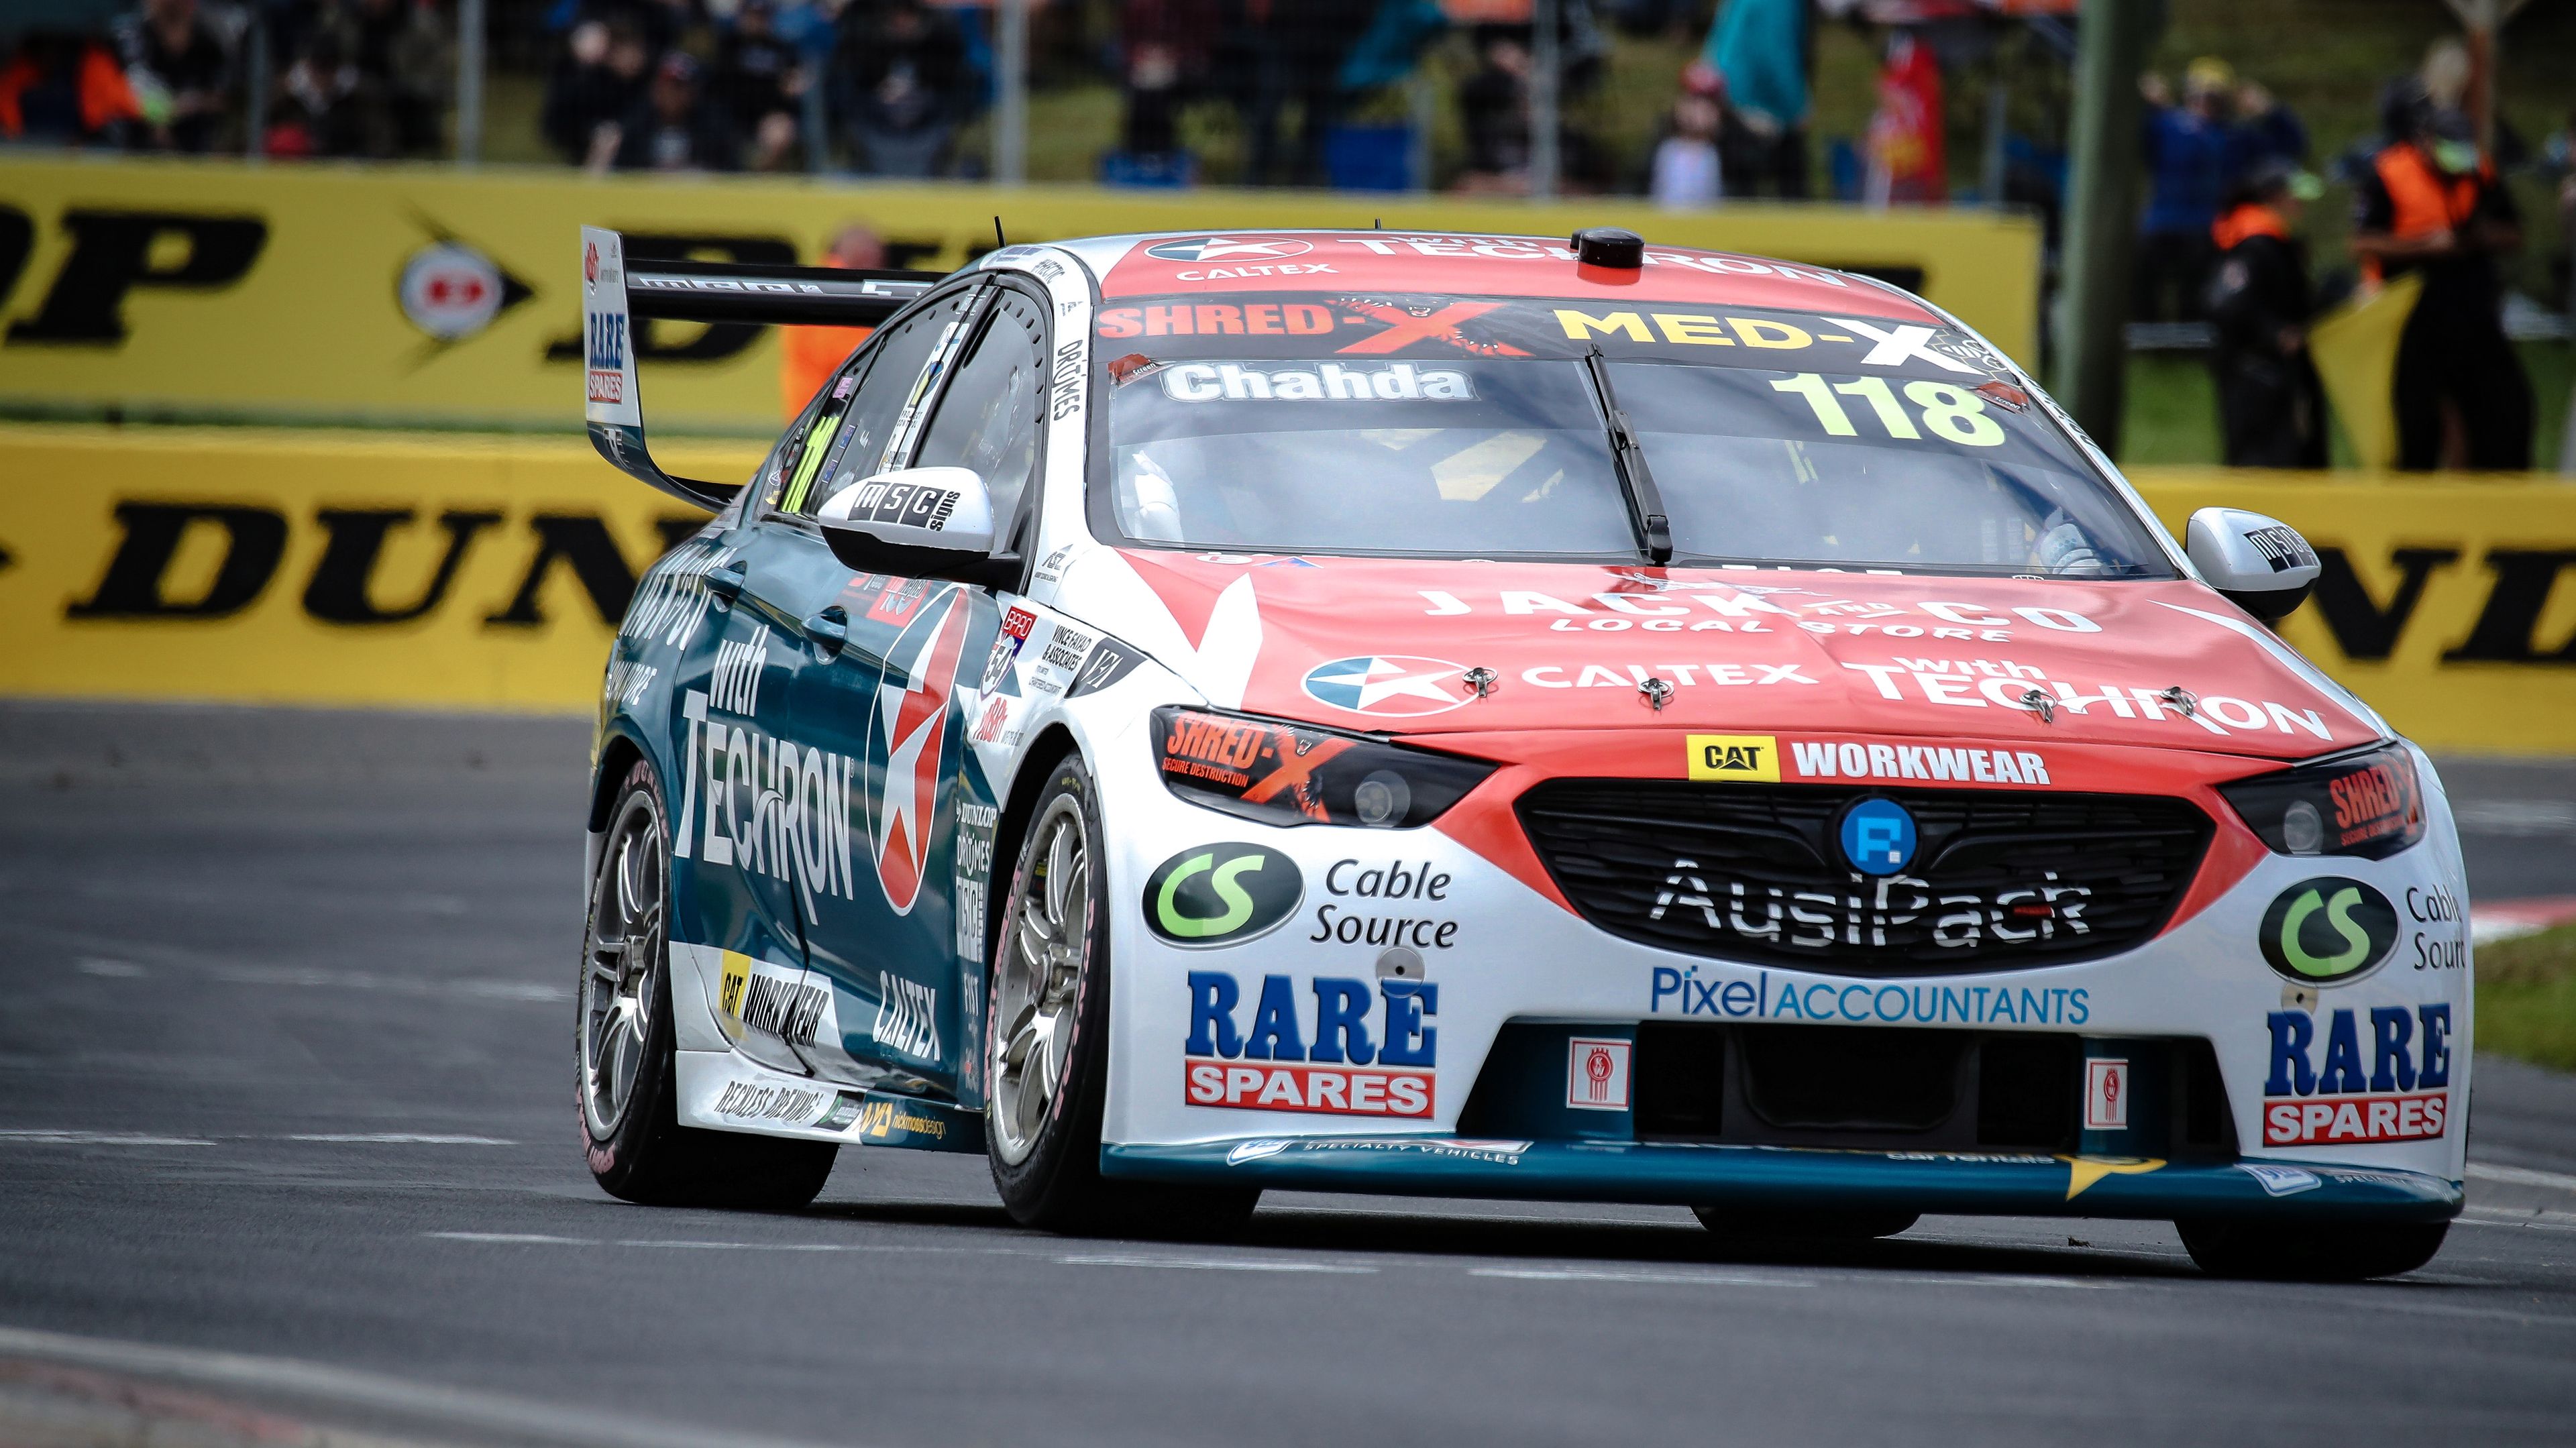 Matt Chahda on track in the Caltex Young Stars Wildcard at the Bathurst 1000.